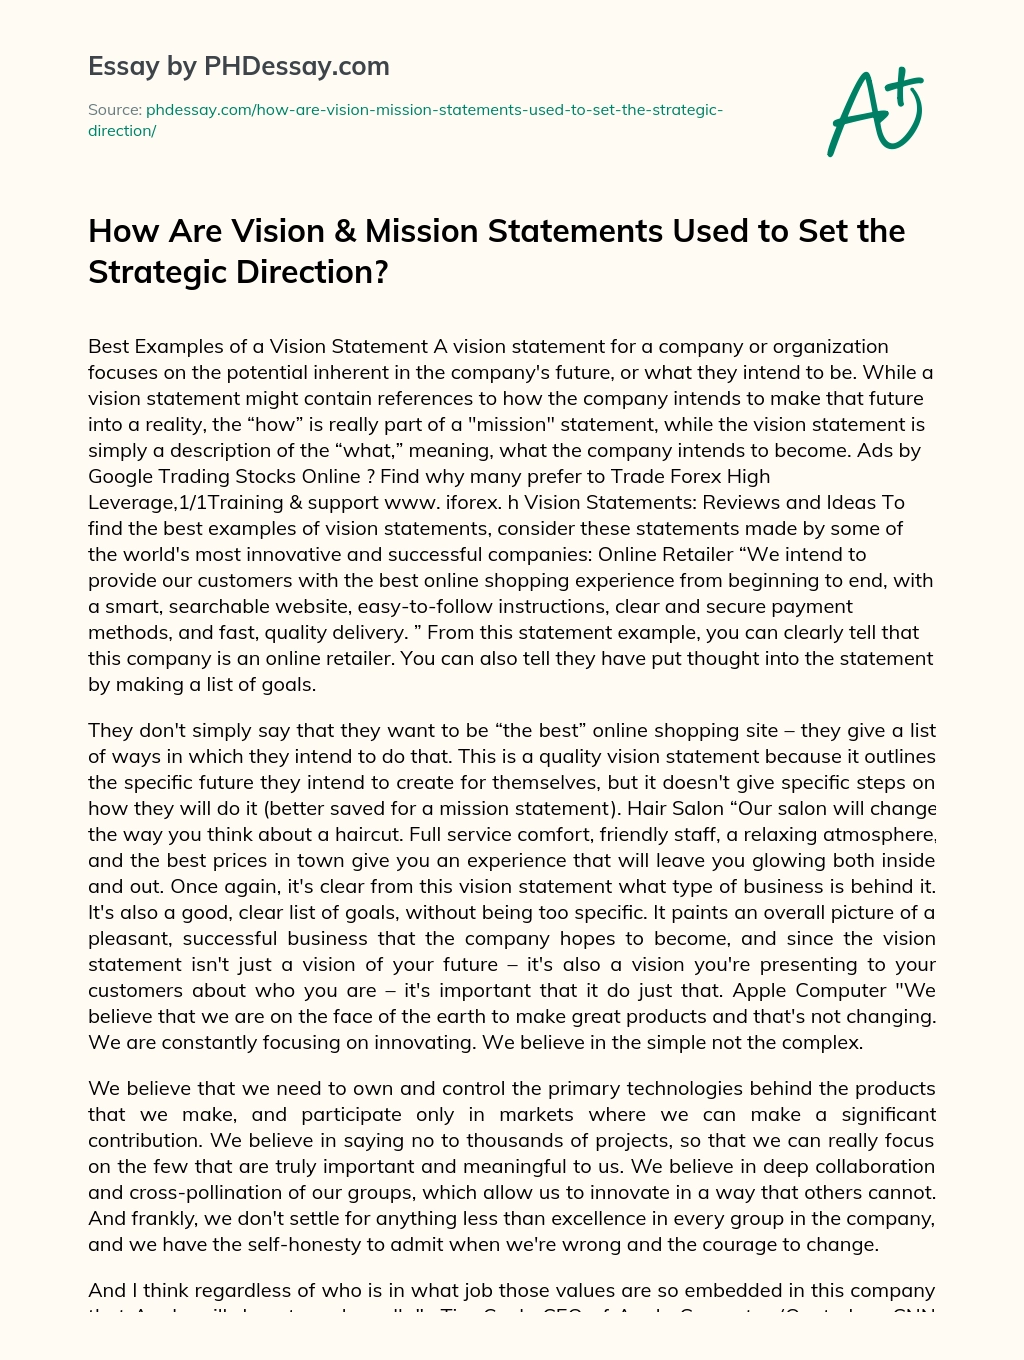 How Are Vision & Mission Statements Used to Set the Strategic Direction? essay